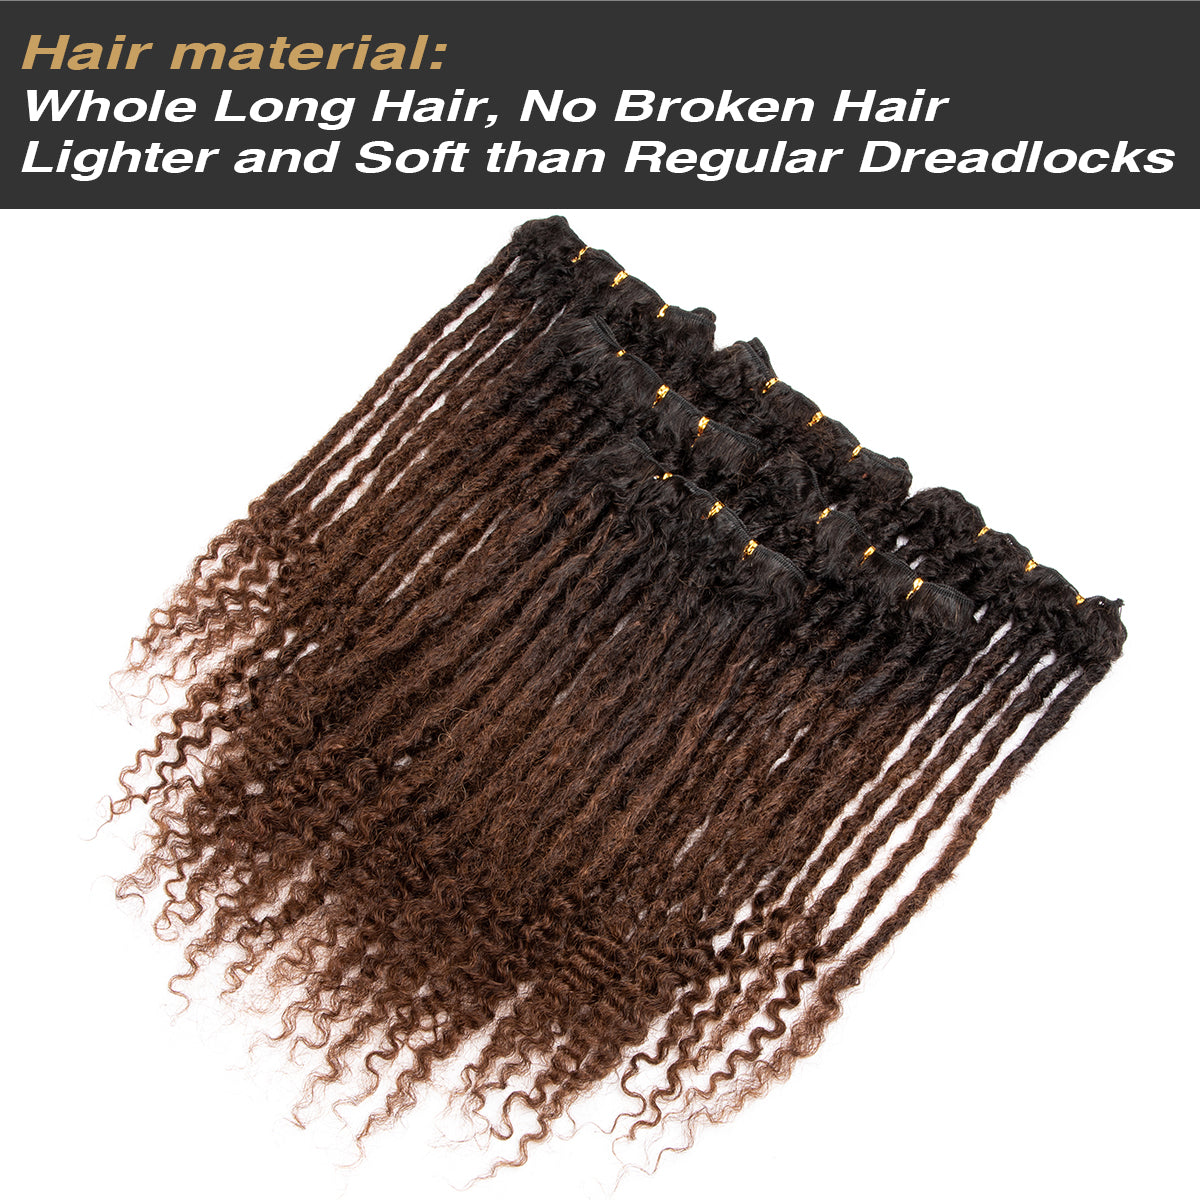 Human Hair Dreadlocks Extensions Freego Curly Ends Handmade Permanen Dreads Locs Hair Extensions For Men and Women